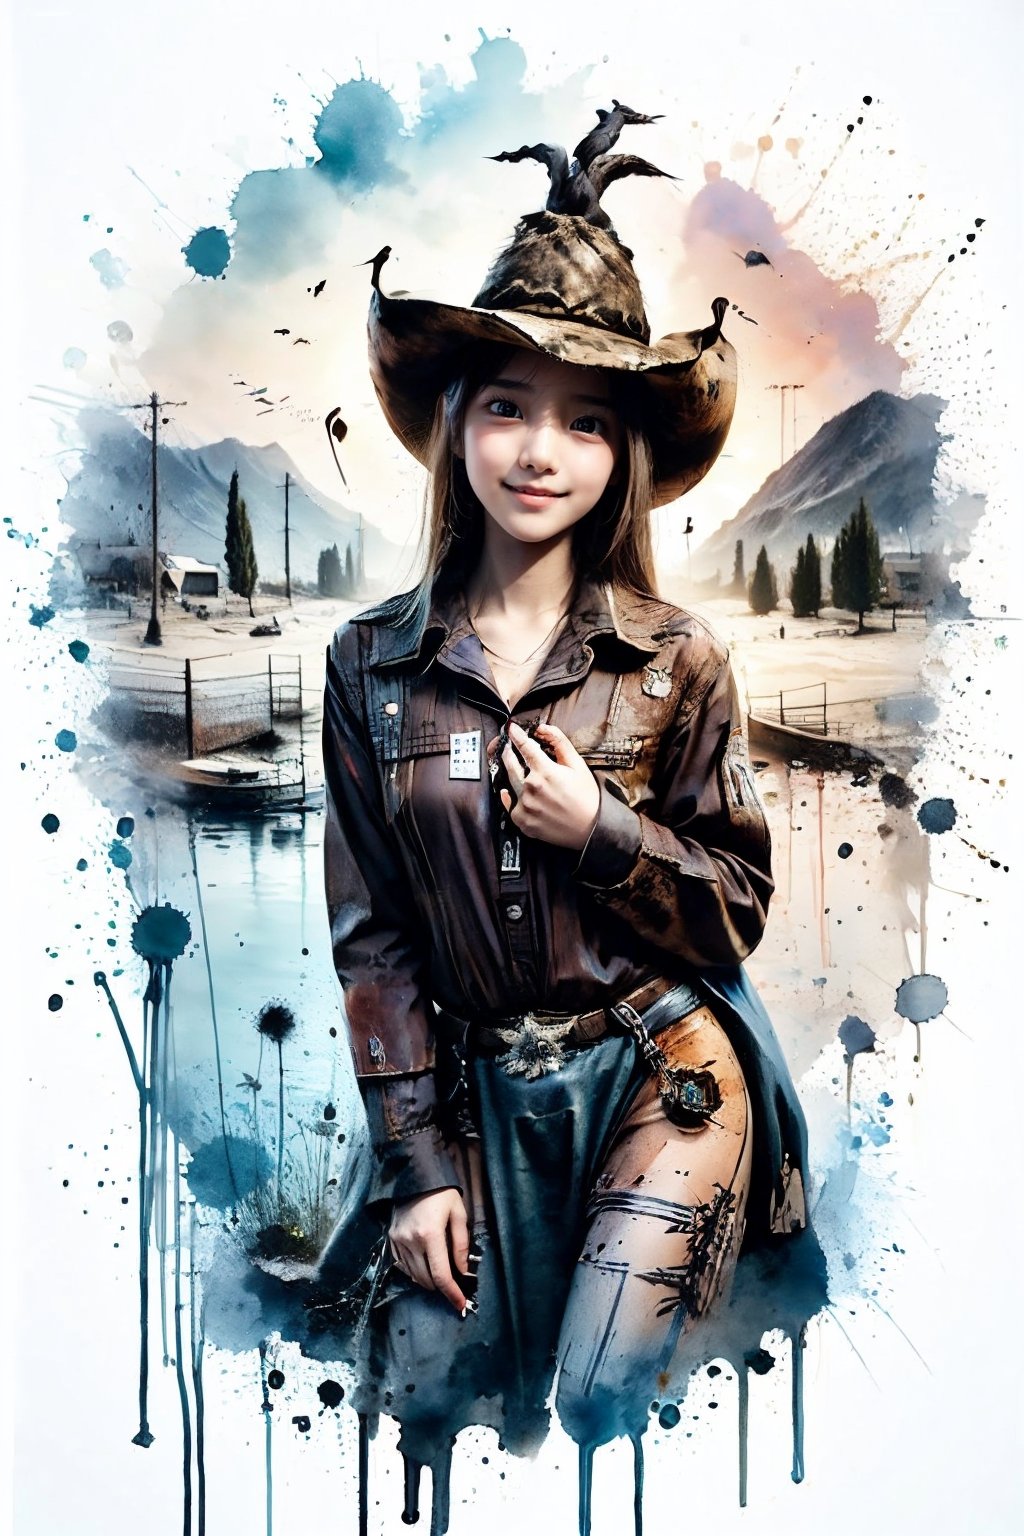 solo, ((Cowboy Shot: 1.5)), 1 girl, beautiful korean girl, looking at viewer, 18 yo, over sized eyes, big eyes, smiling, girl caressing a rabbit, dressed as a witch near a river, crouching caressing the rabbit, pastel colors, purple colors, blue colors, green colors, shading, gray scale, hand drawn,Chromaspots,ink splash